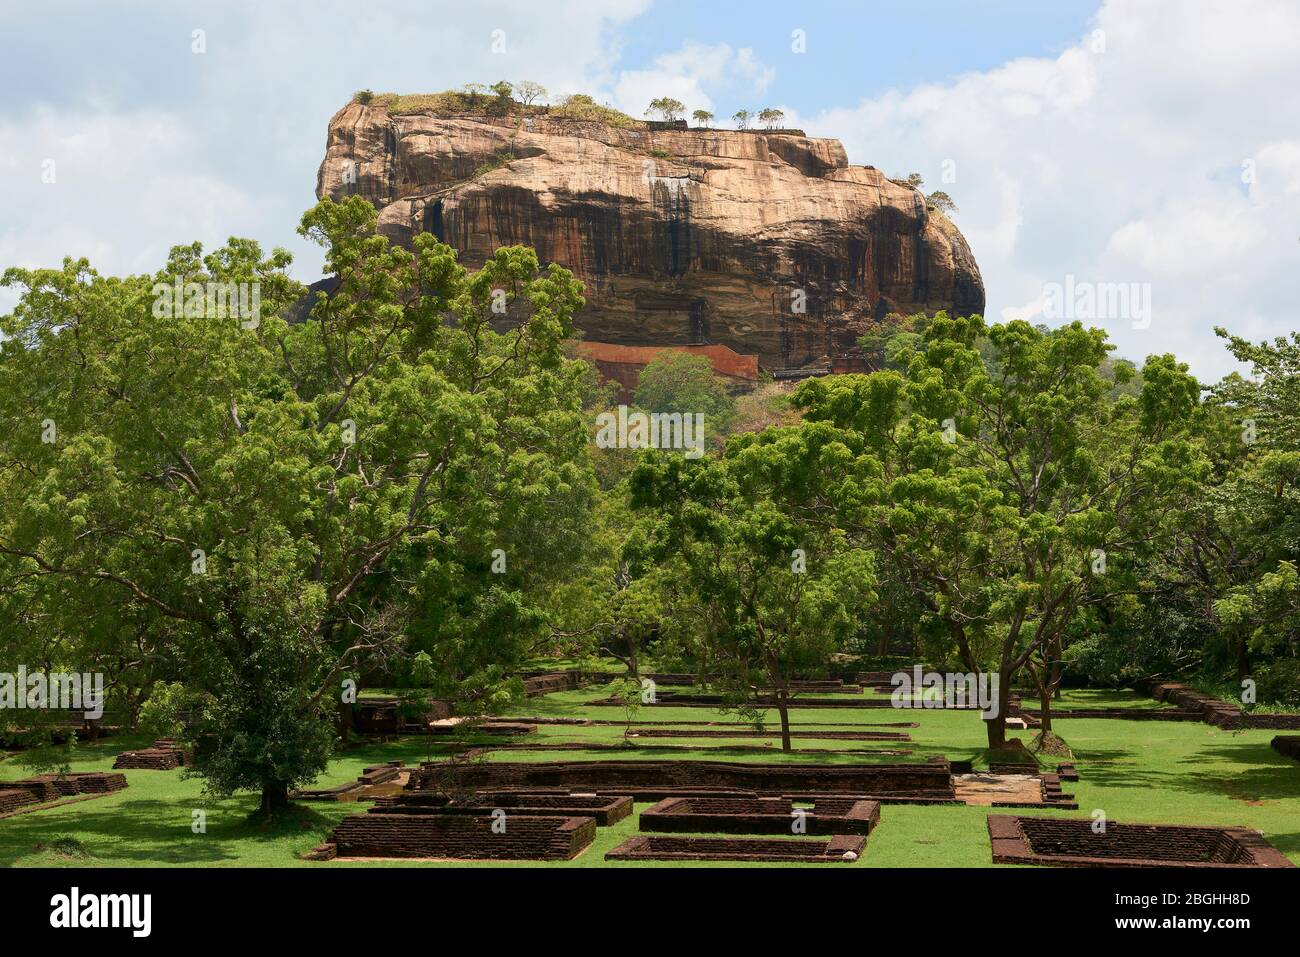 Sigiriya Rock in Sri Lanka, seen from archeological site. This popular tourist attraction is a UNESCO World Heritage Site and features ruins from the Stock Photo